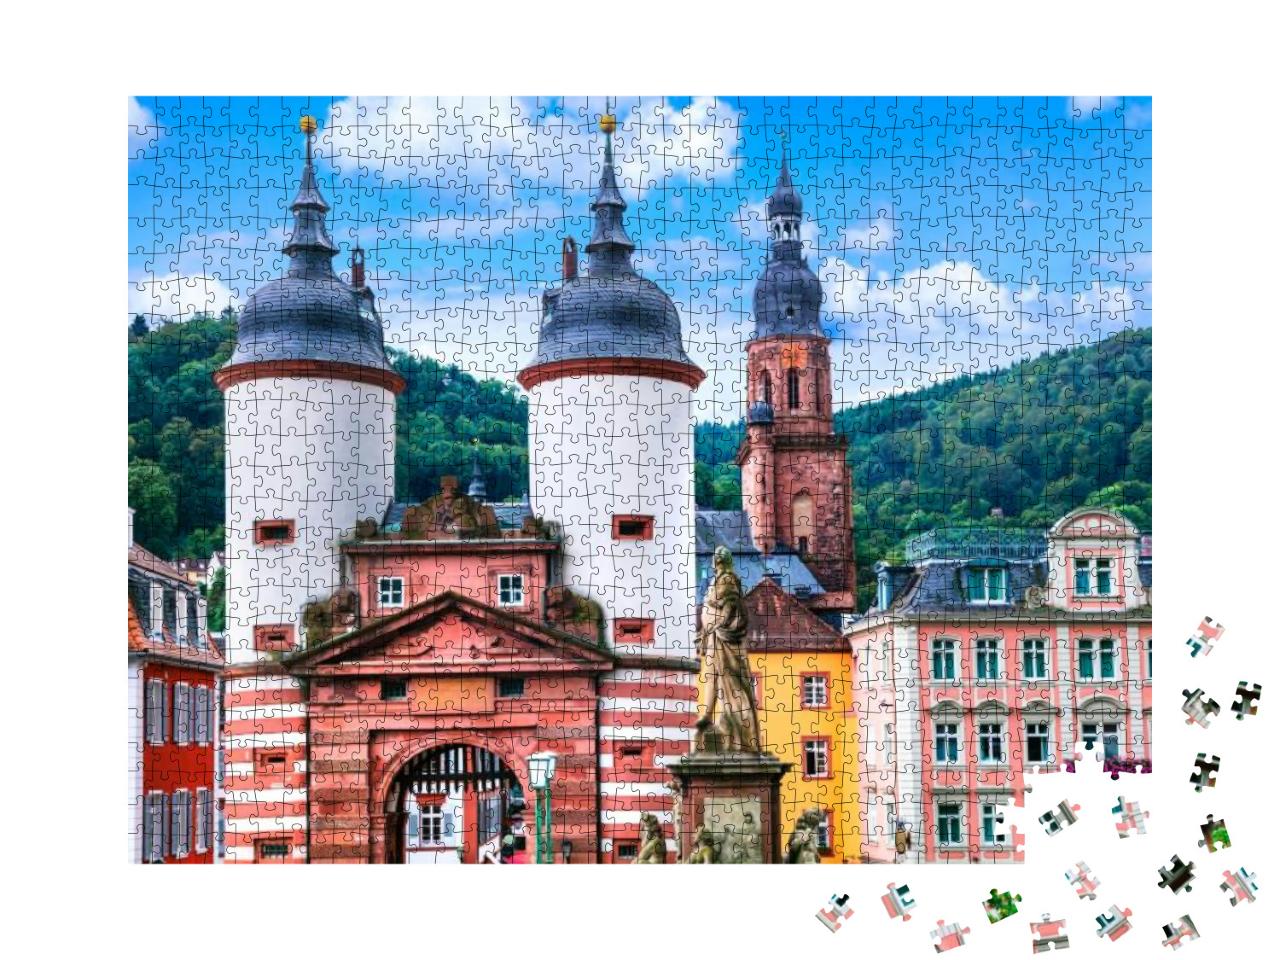 Landmarks & Beautiful Towns of Germany - Medieval Heidelb... Jigsaw Puzzle with 1000 pieces